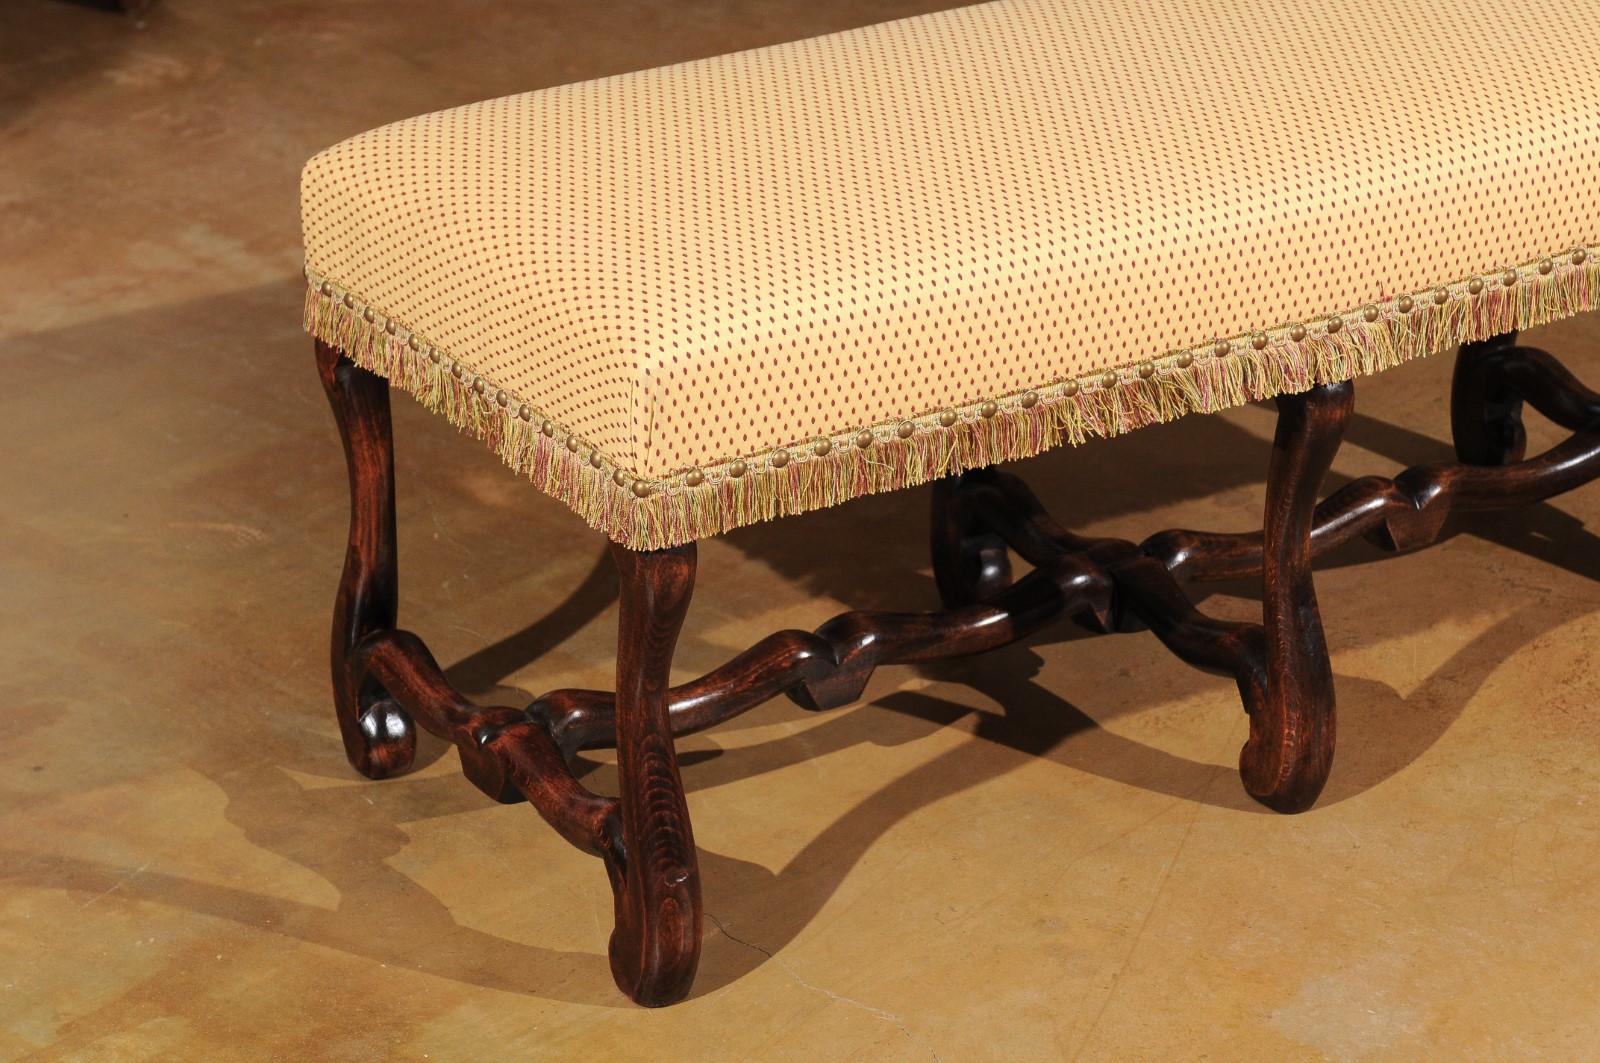 19th Century French Louis XIII Style Upholstered Bench with Os De Mouton Legs, circa 1860